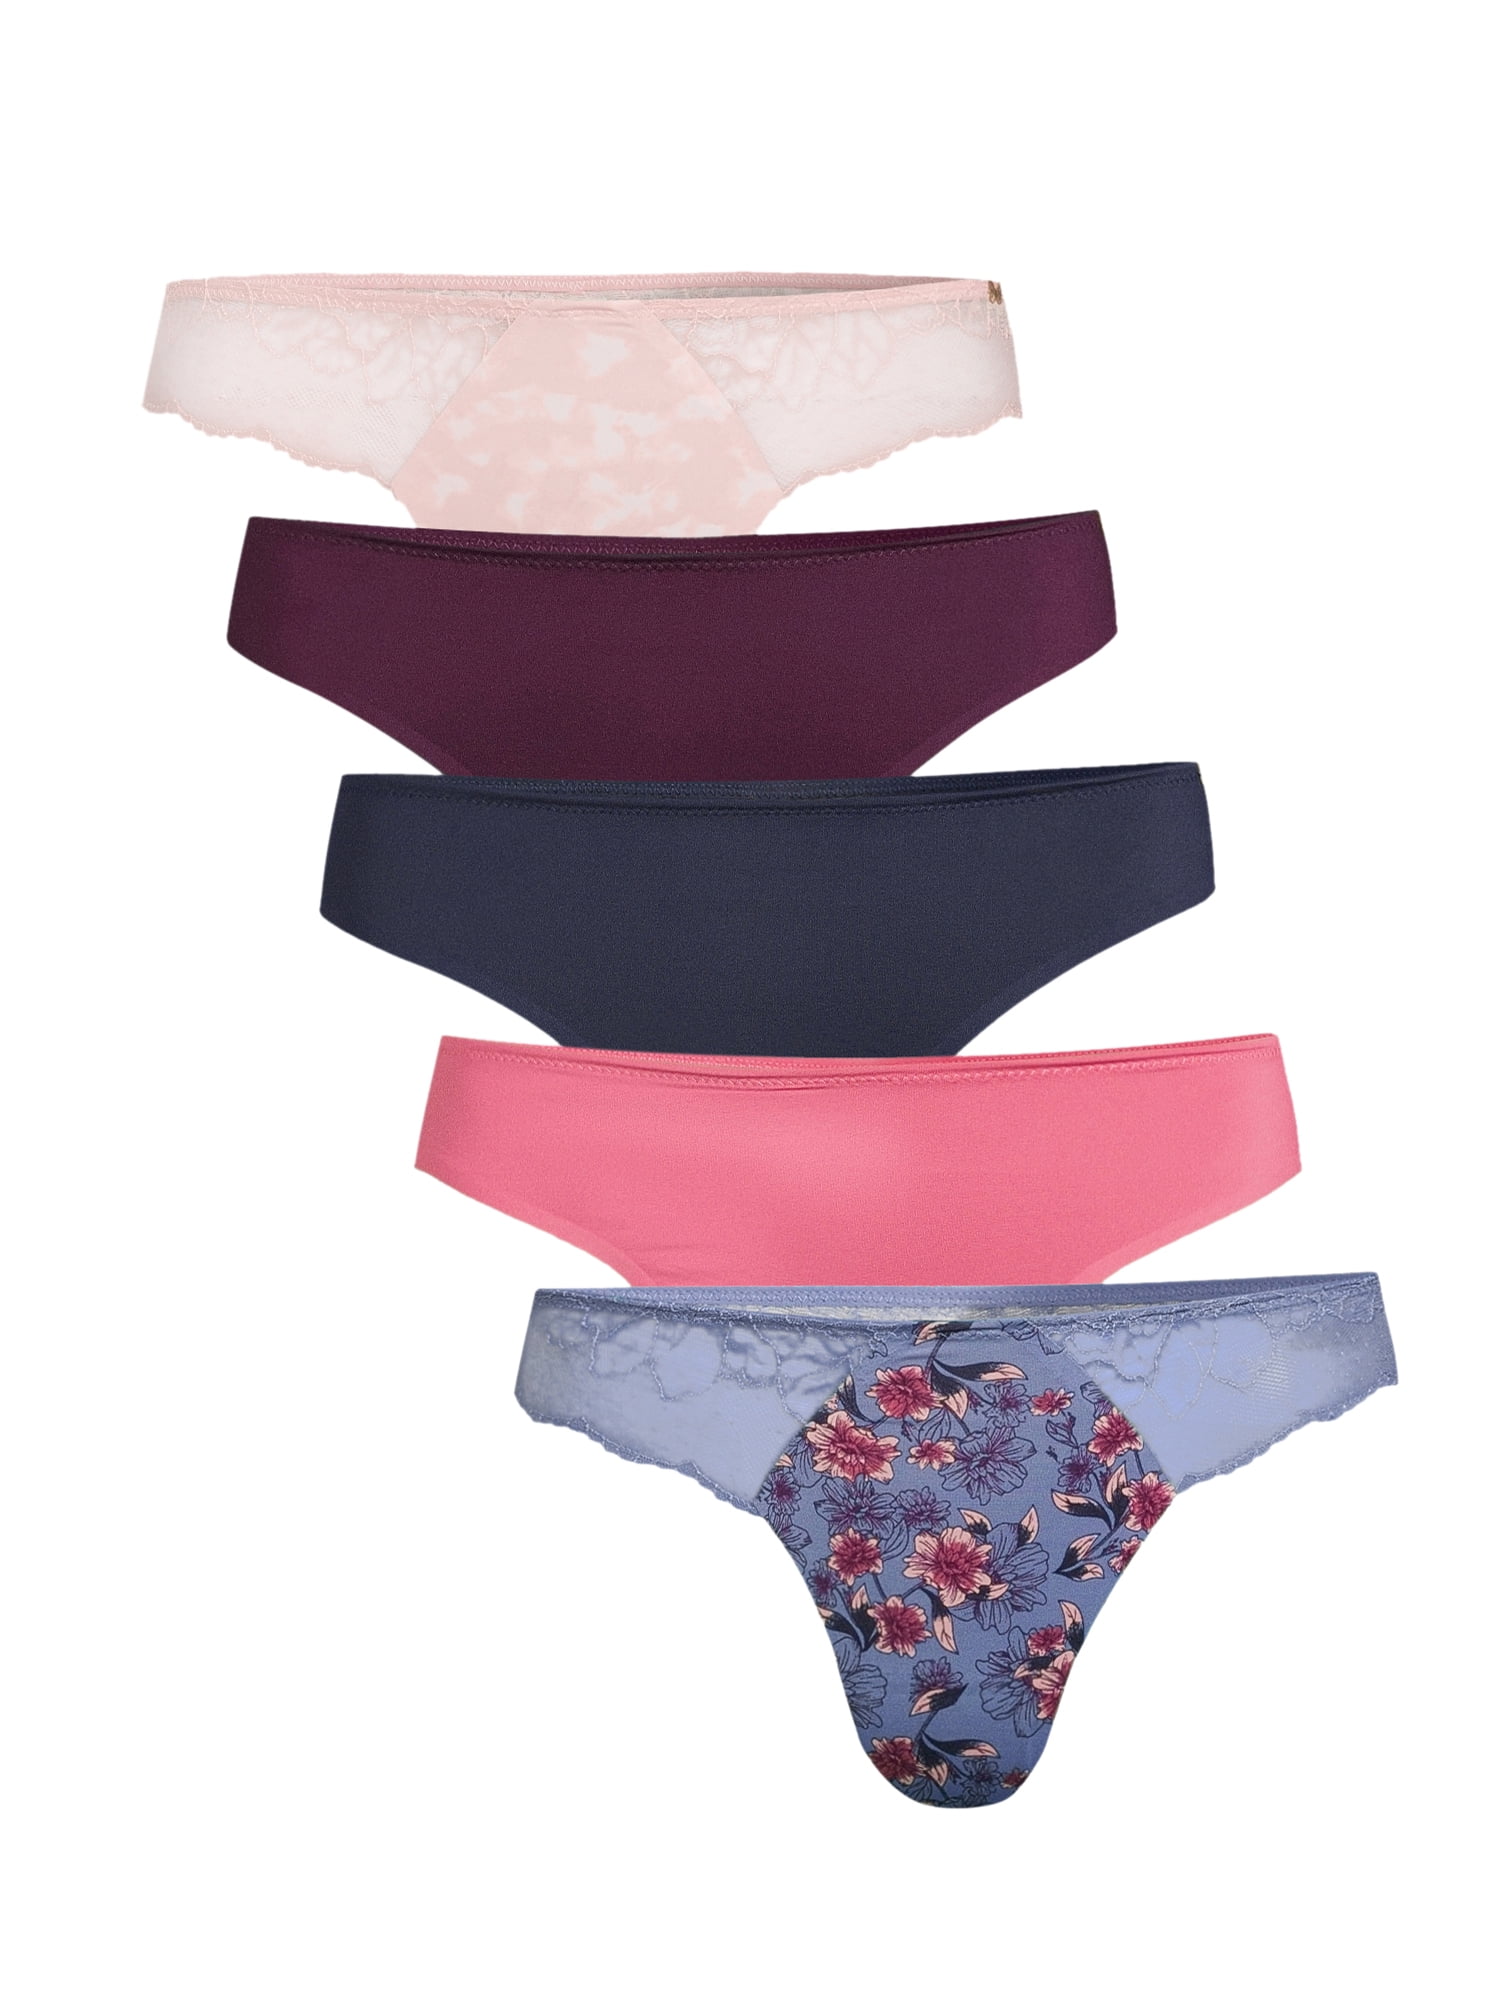 Jessica Simpson Women's Thong Panties with Lace, 5-Pack 